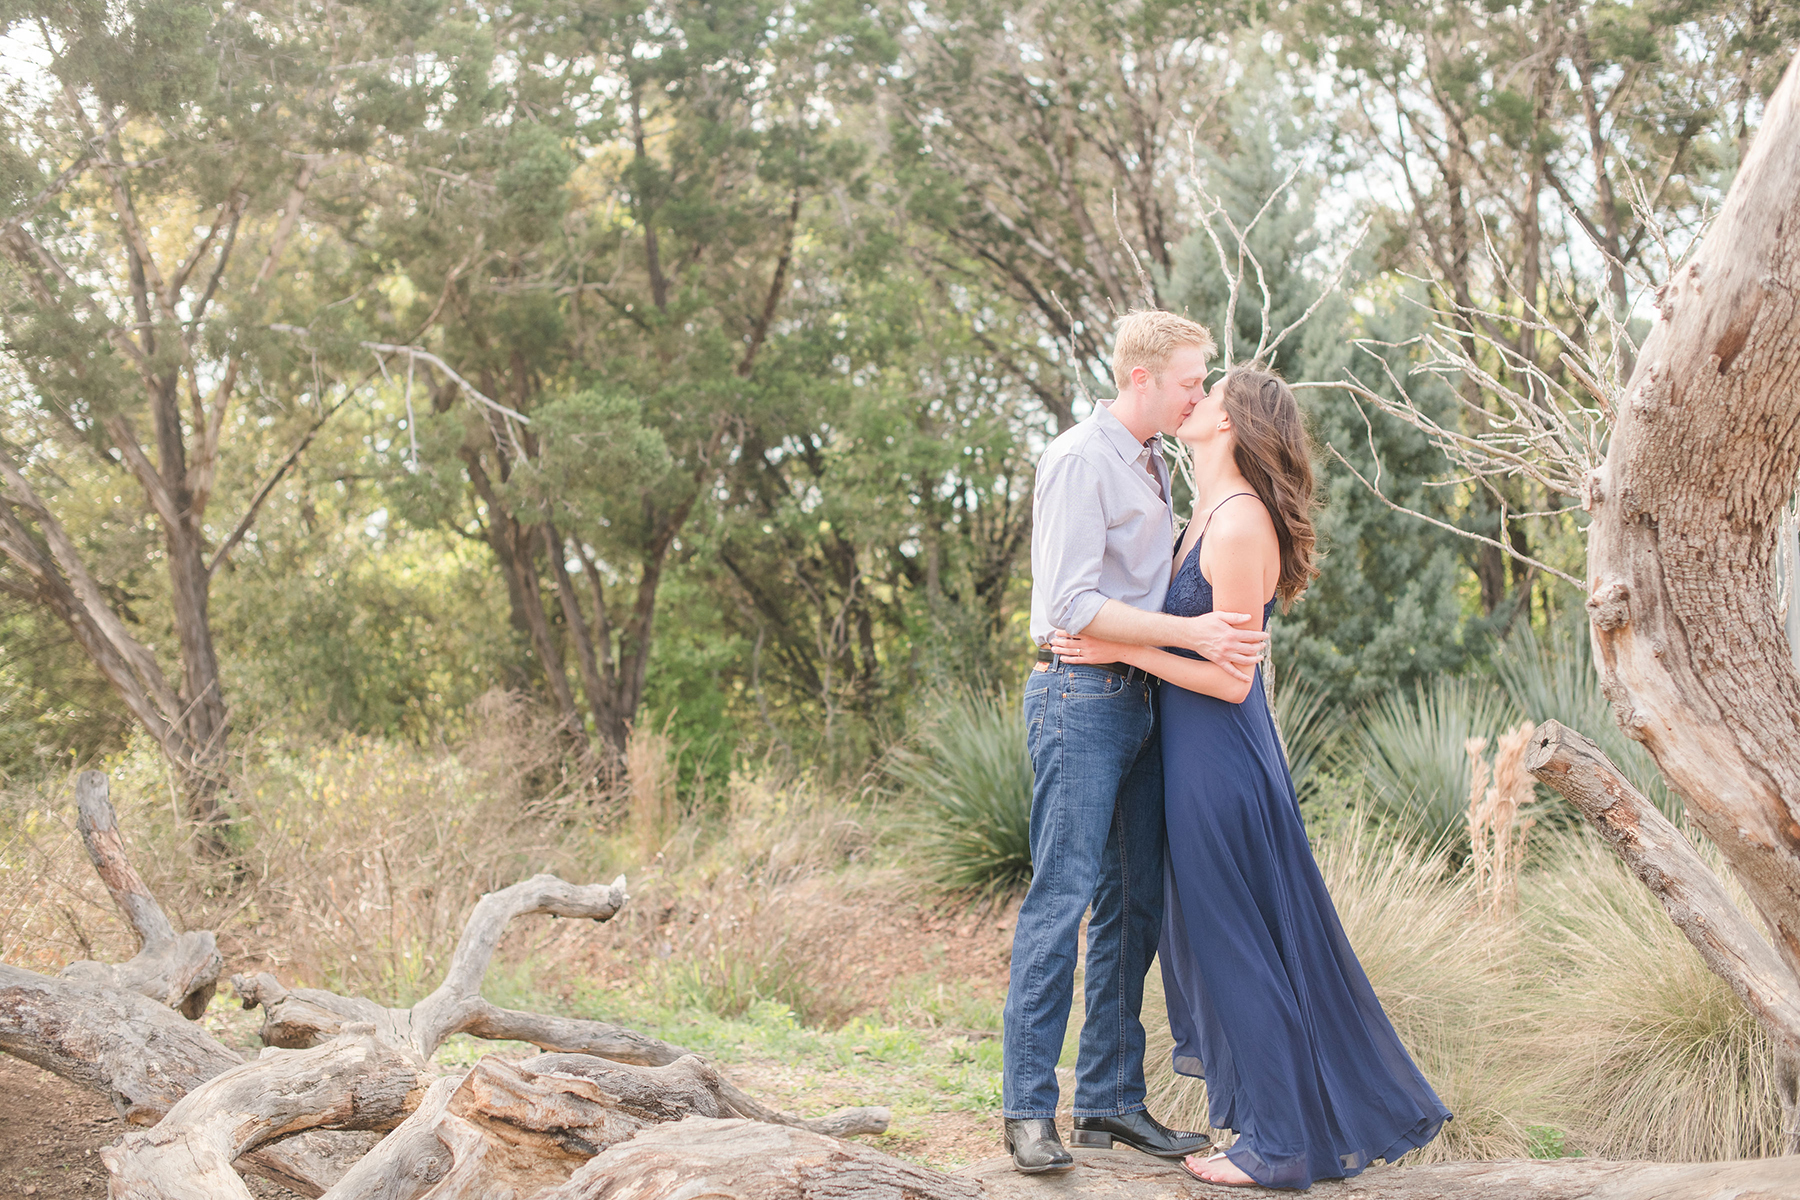 Kissing-in-nature-in-Austin-for-engagement-photo